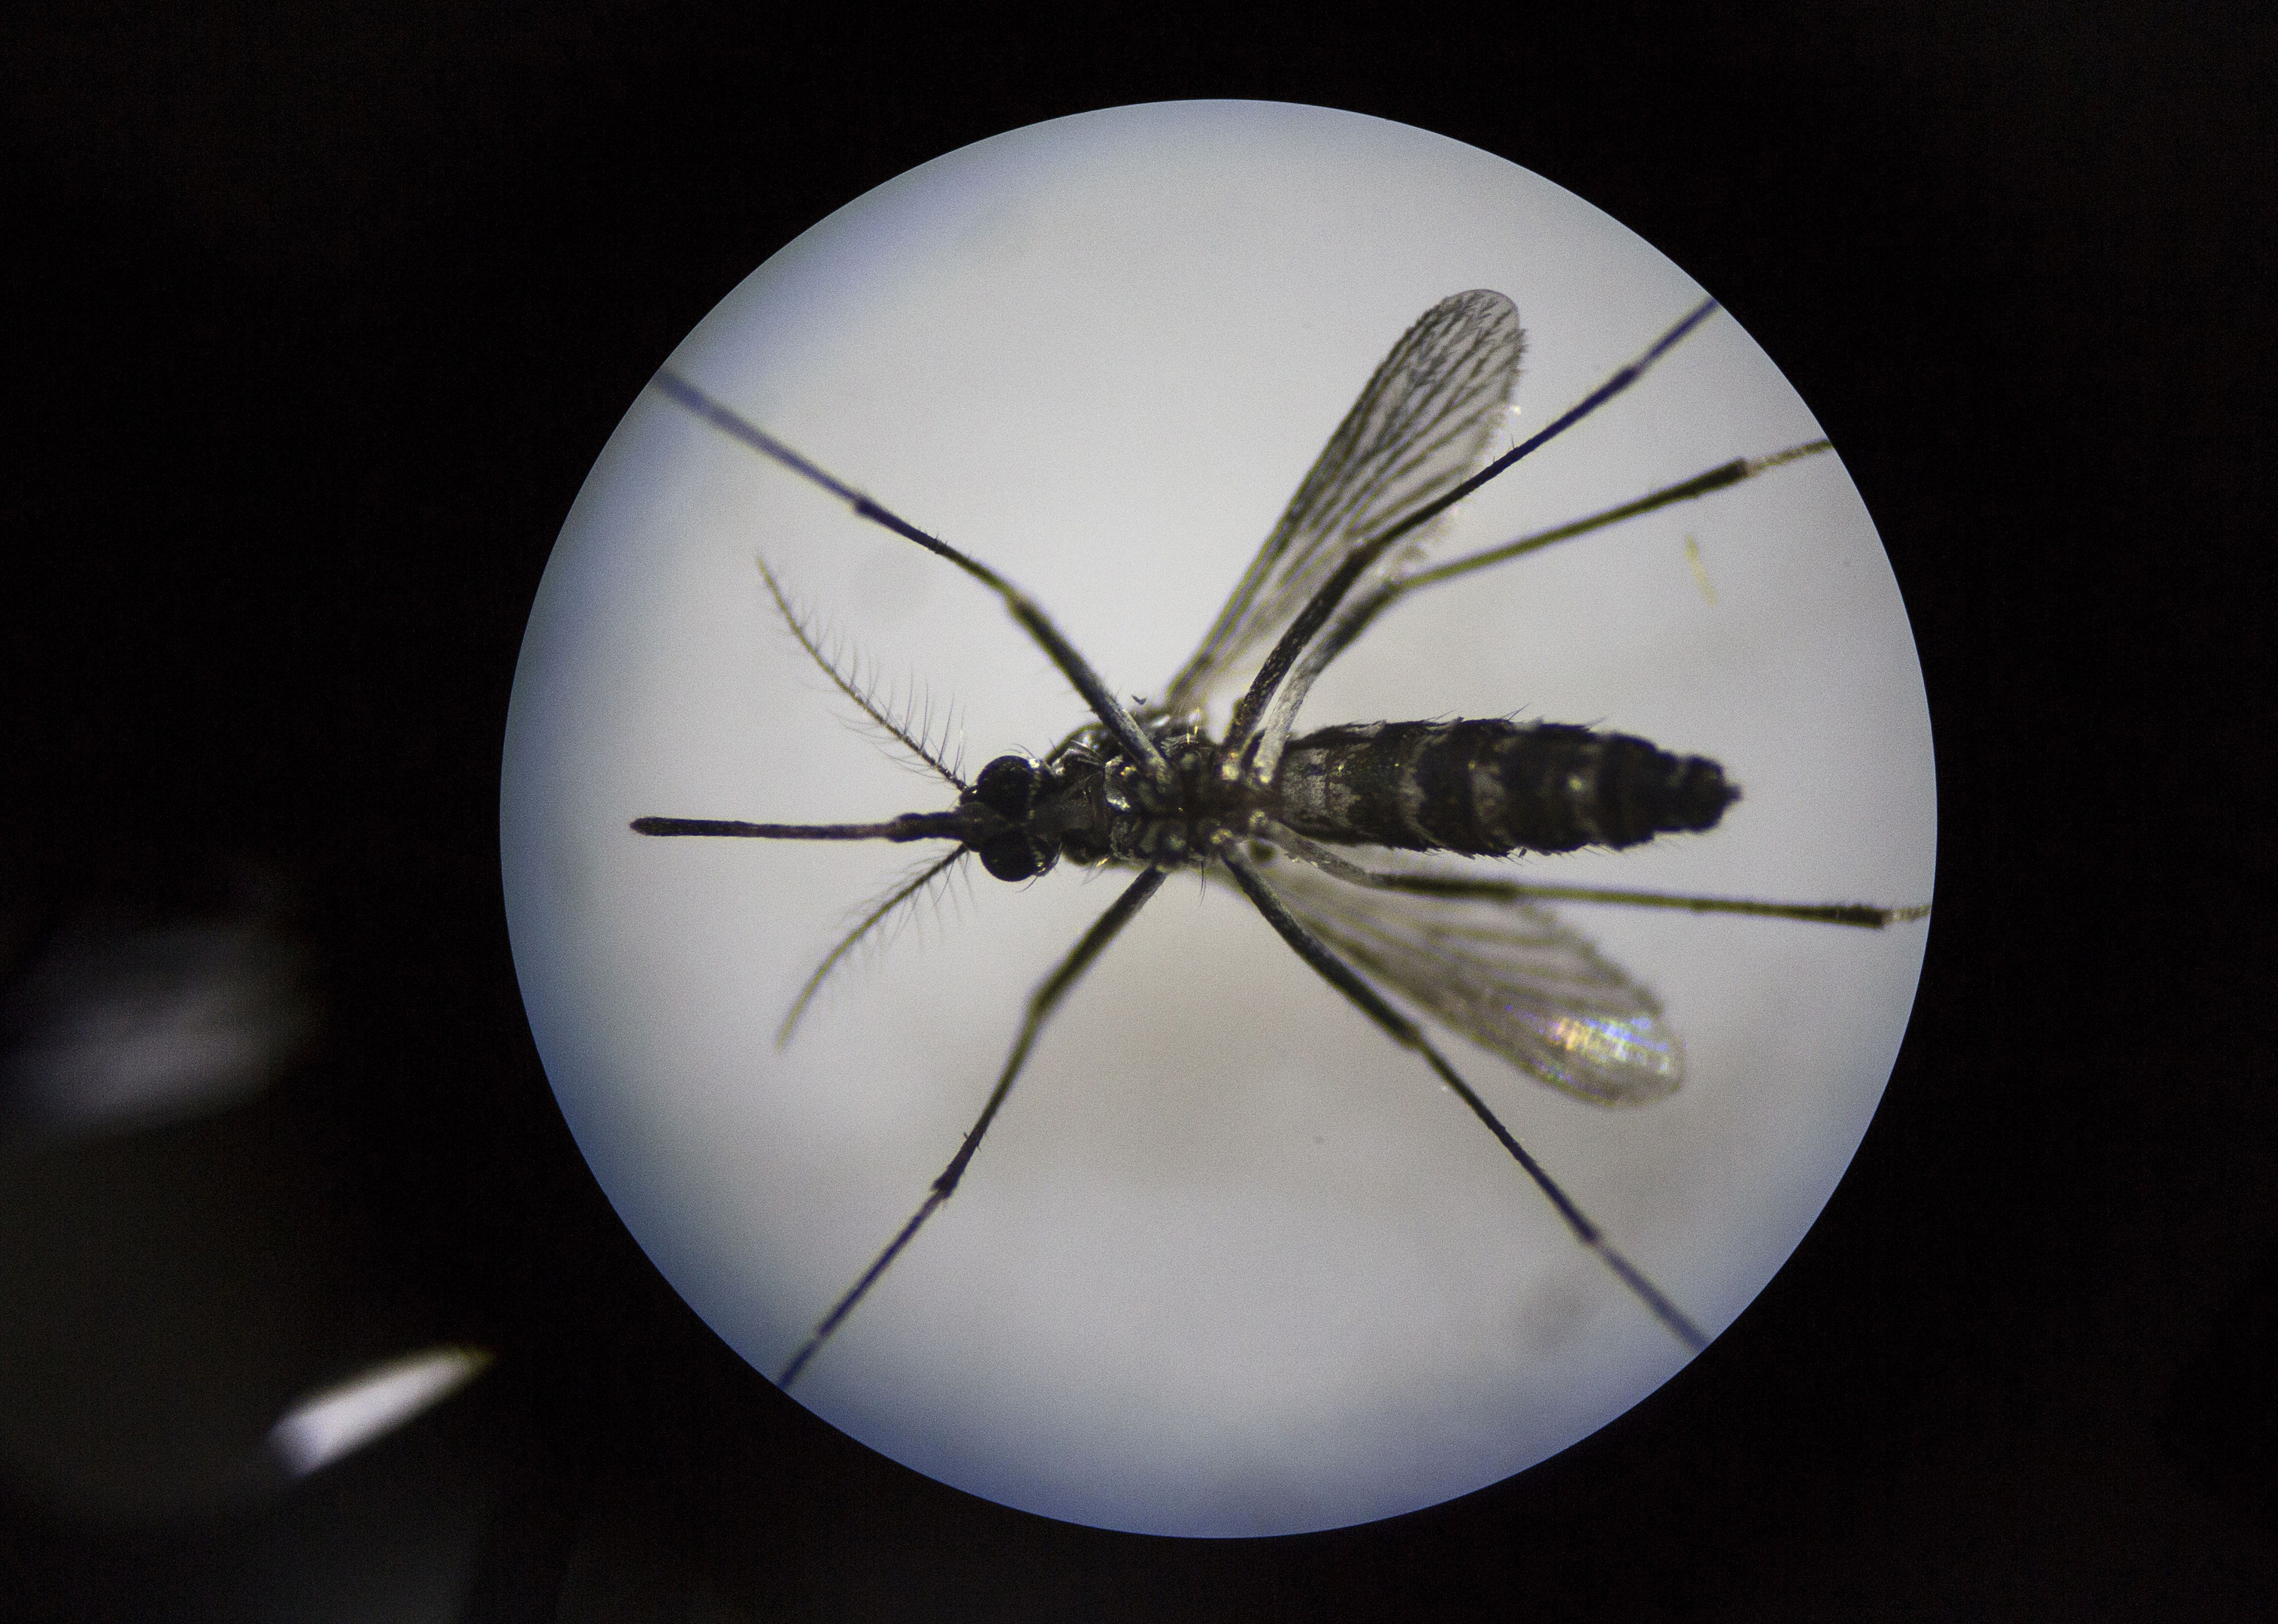 The Zika virus is carried by mosquitoes. 